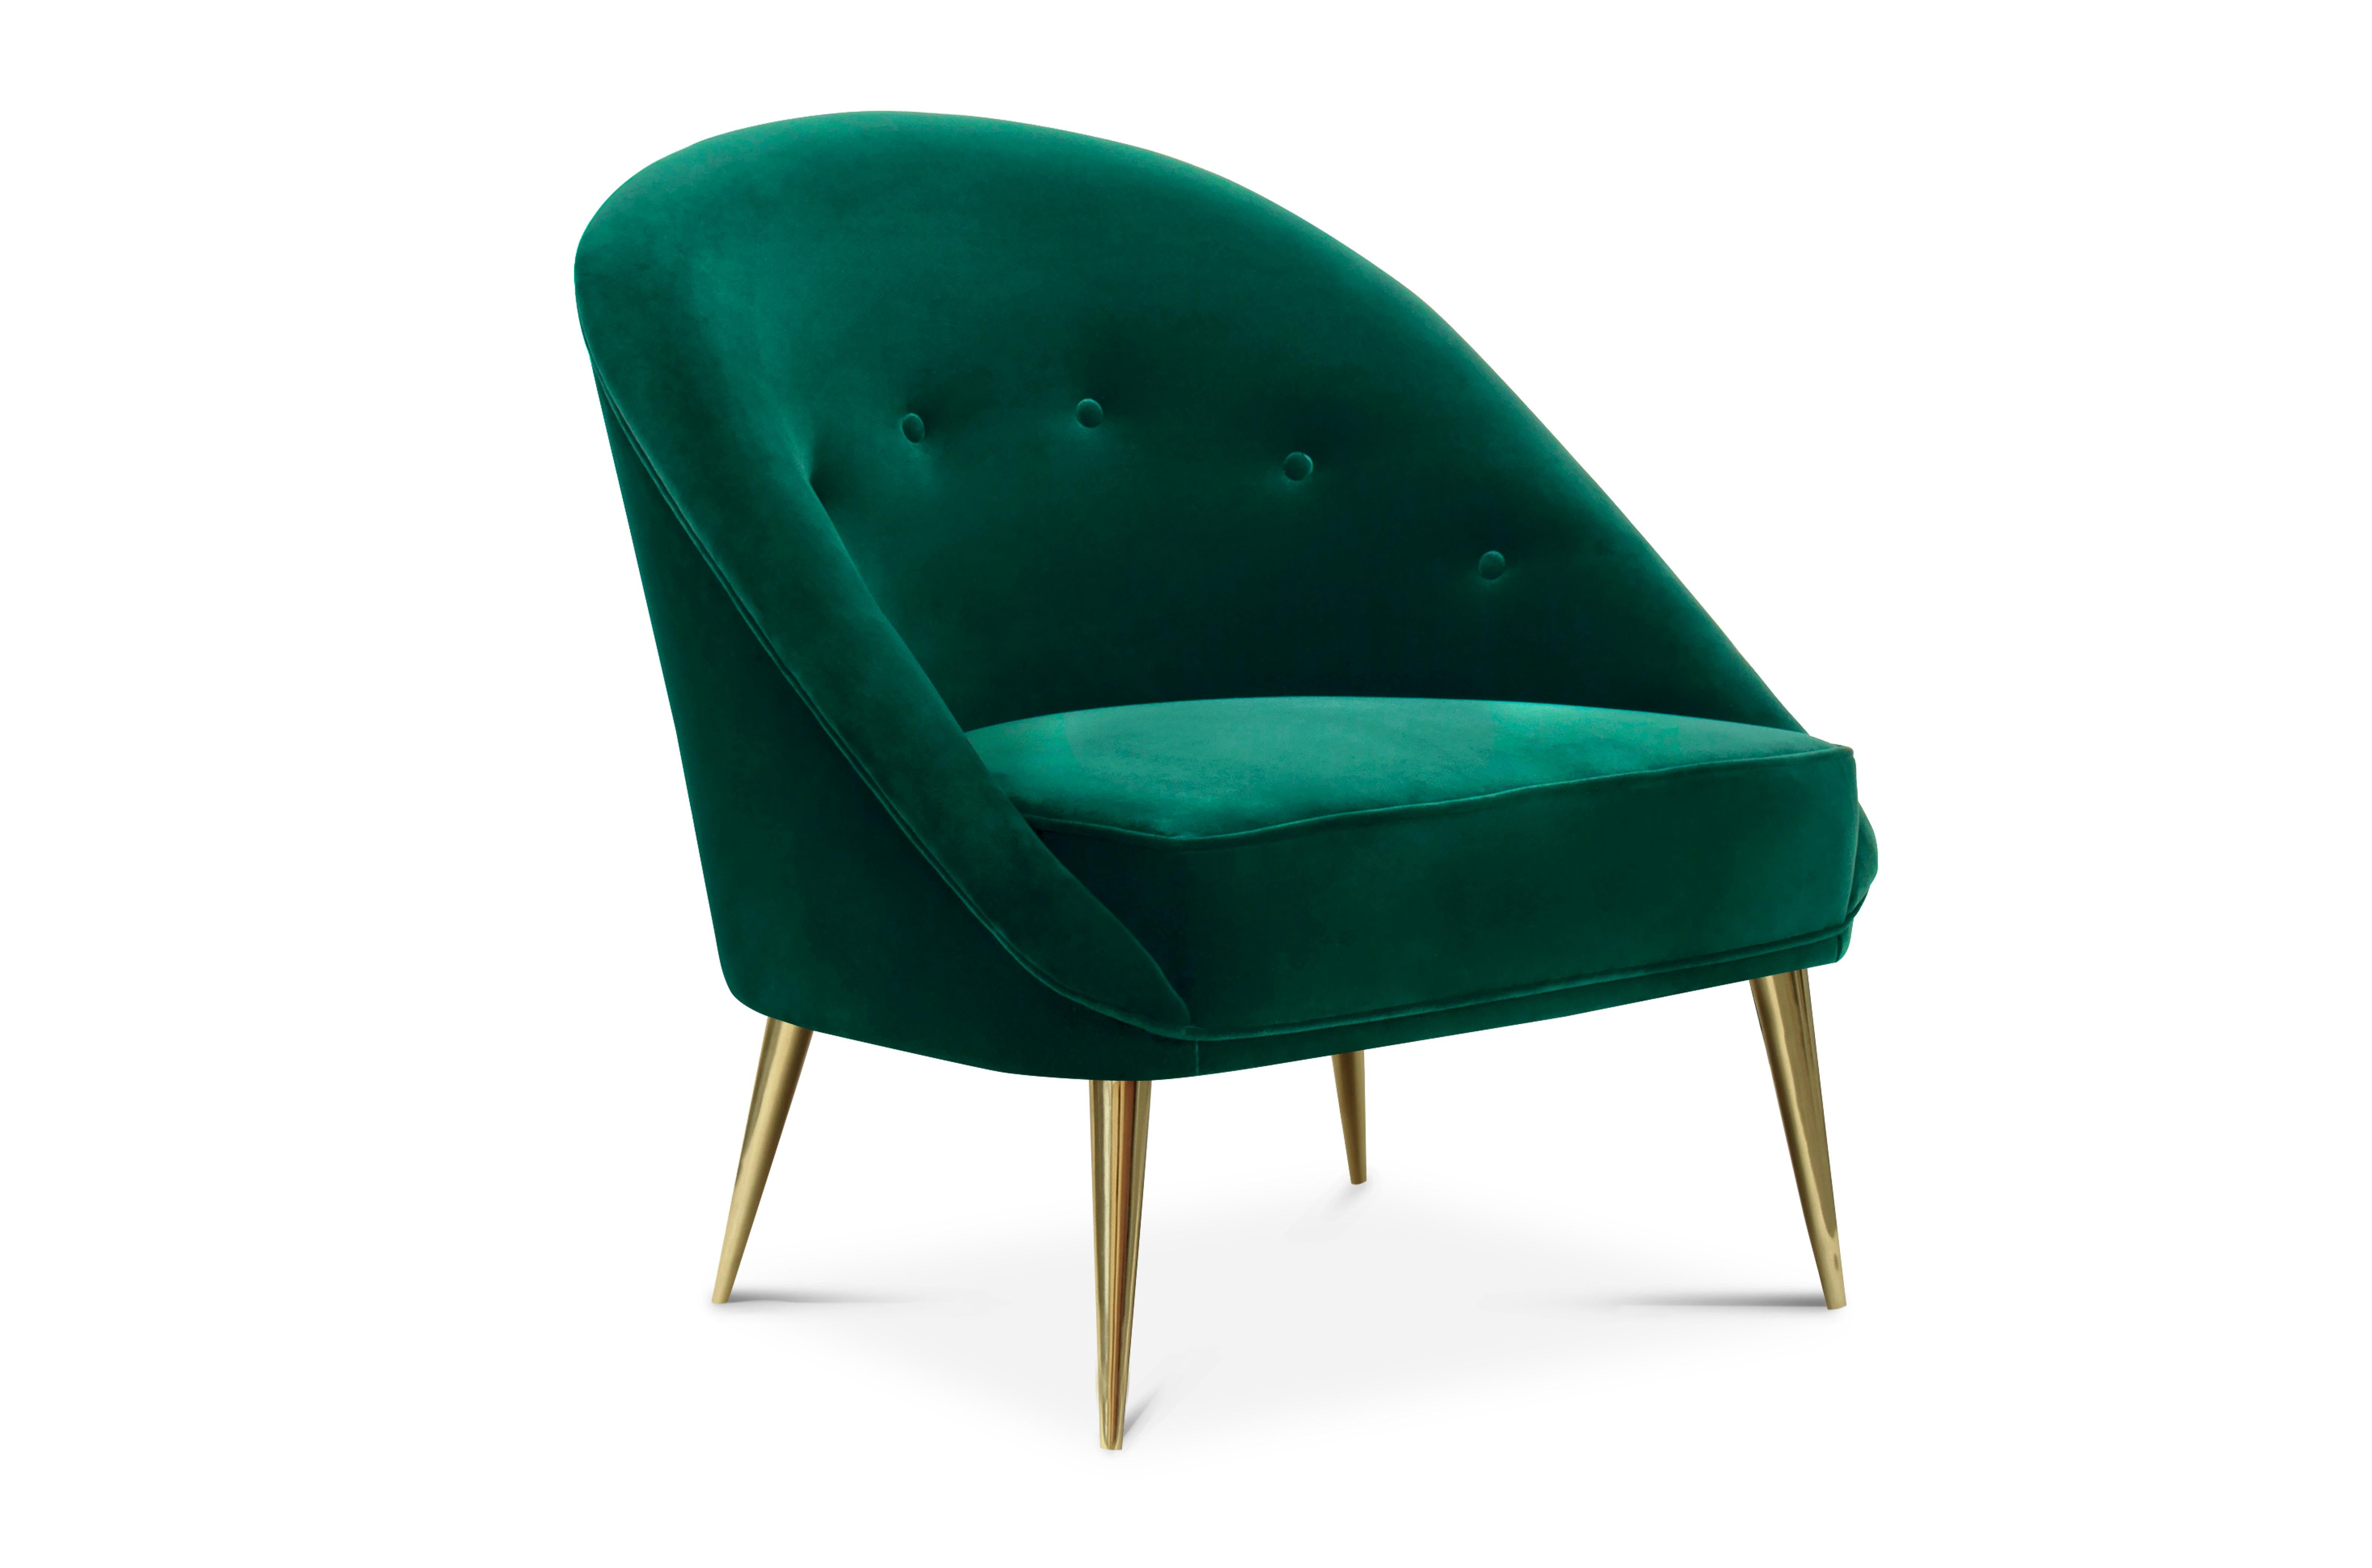 Classic in its silhouette, the lustrous curves of this chair complement those of the modern day woman. A glossy varnish reveals the many hues of the sultry fabric being draped and adorned.

Options
Upholstery: Available in any fabric from the Koket